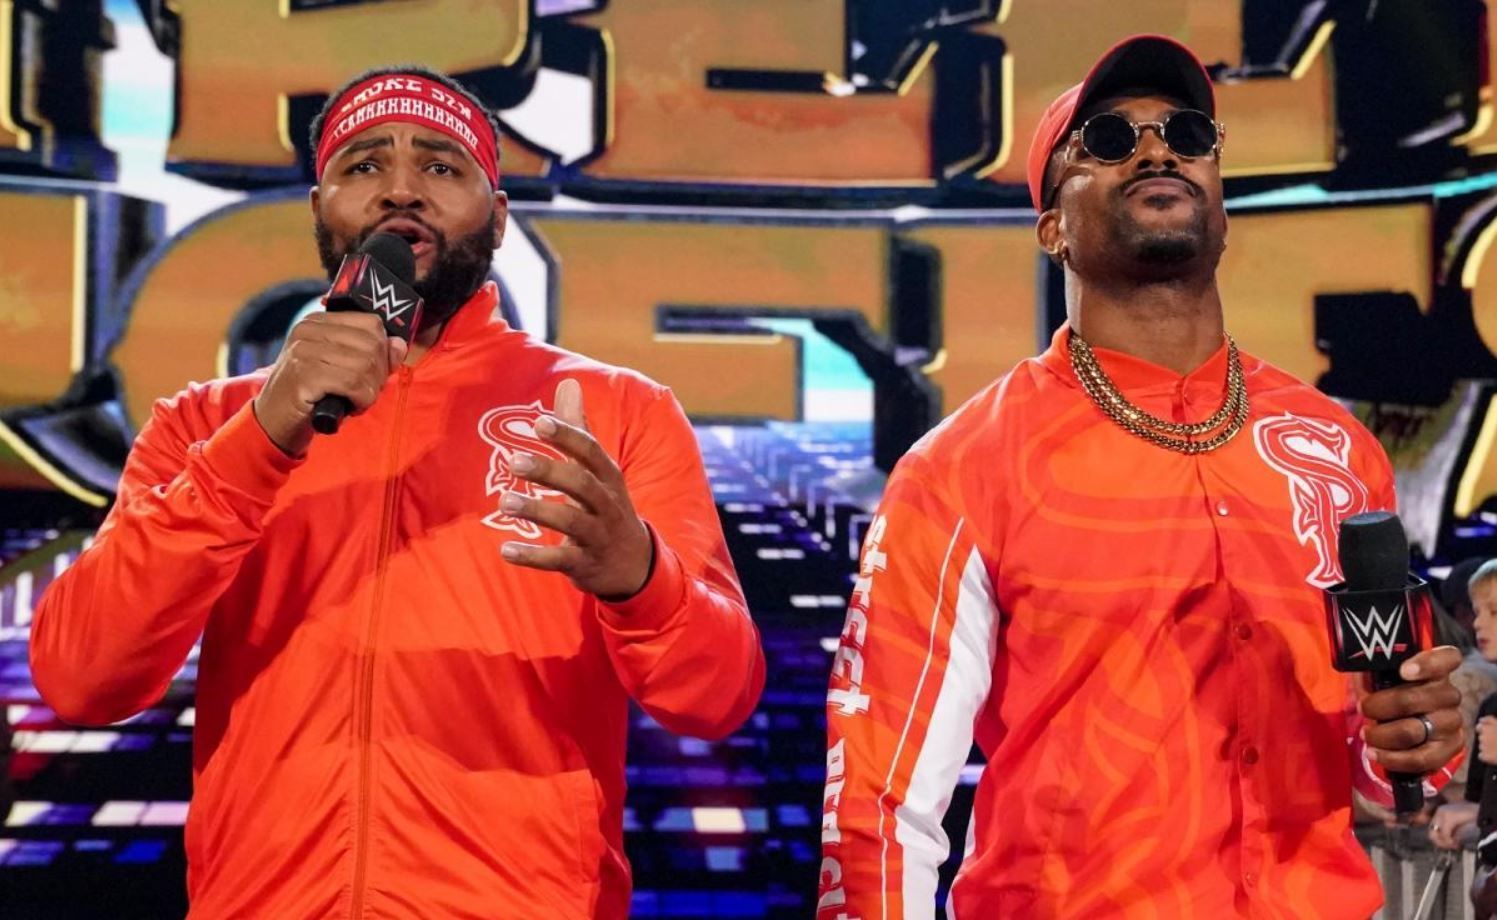 Are the Street Profits the team to dethrone the Usos?